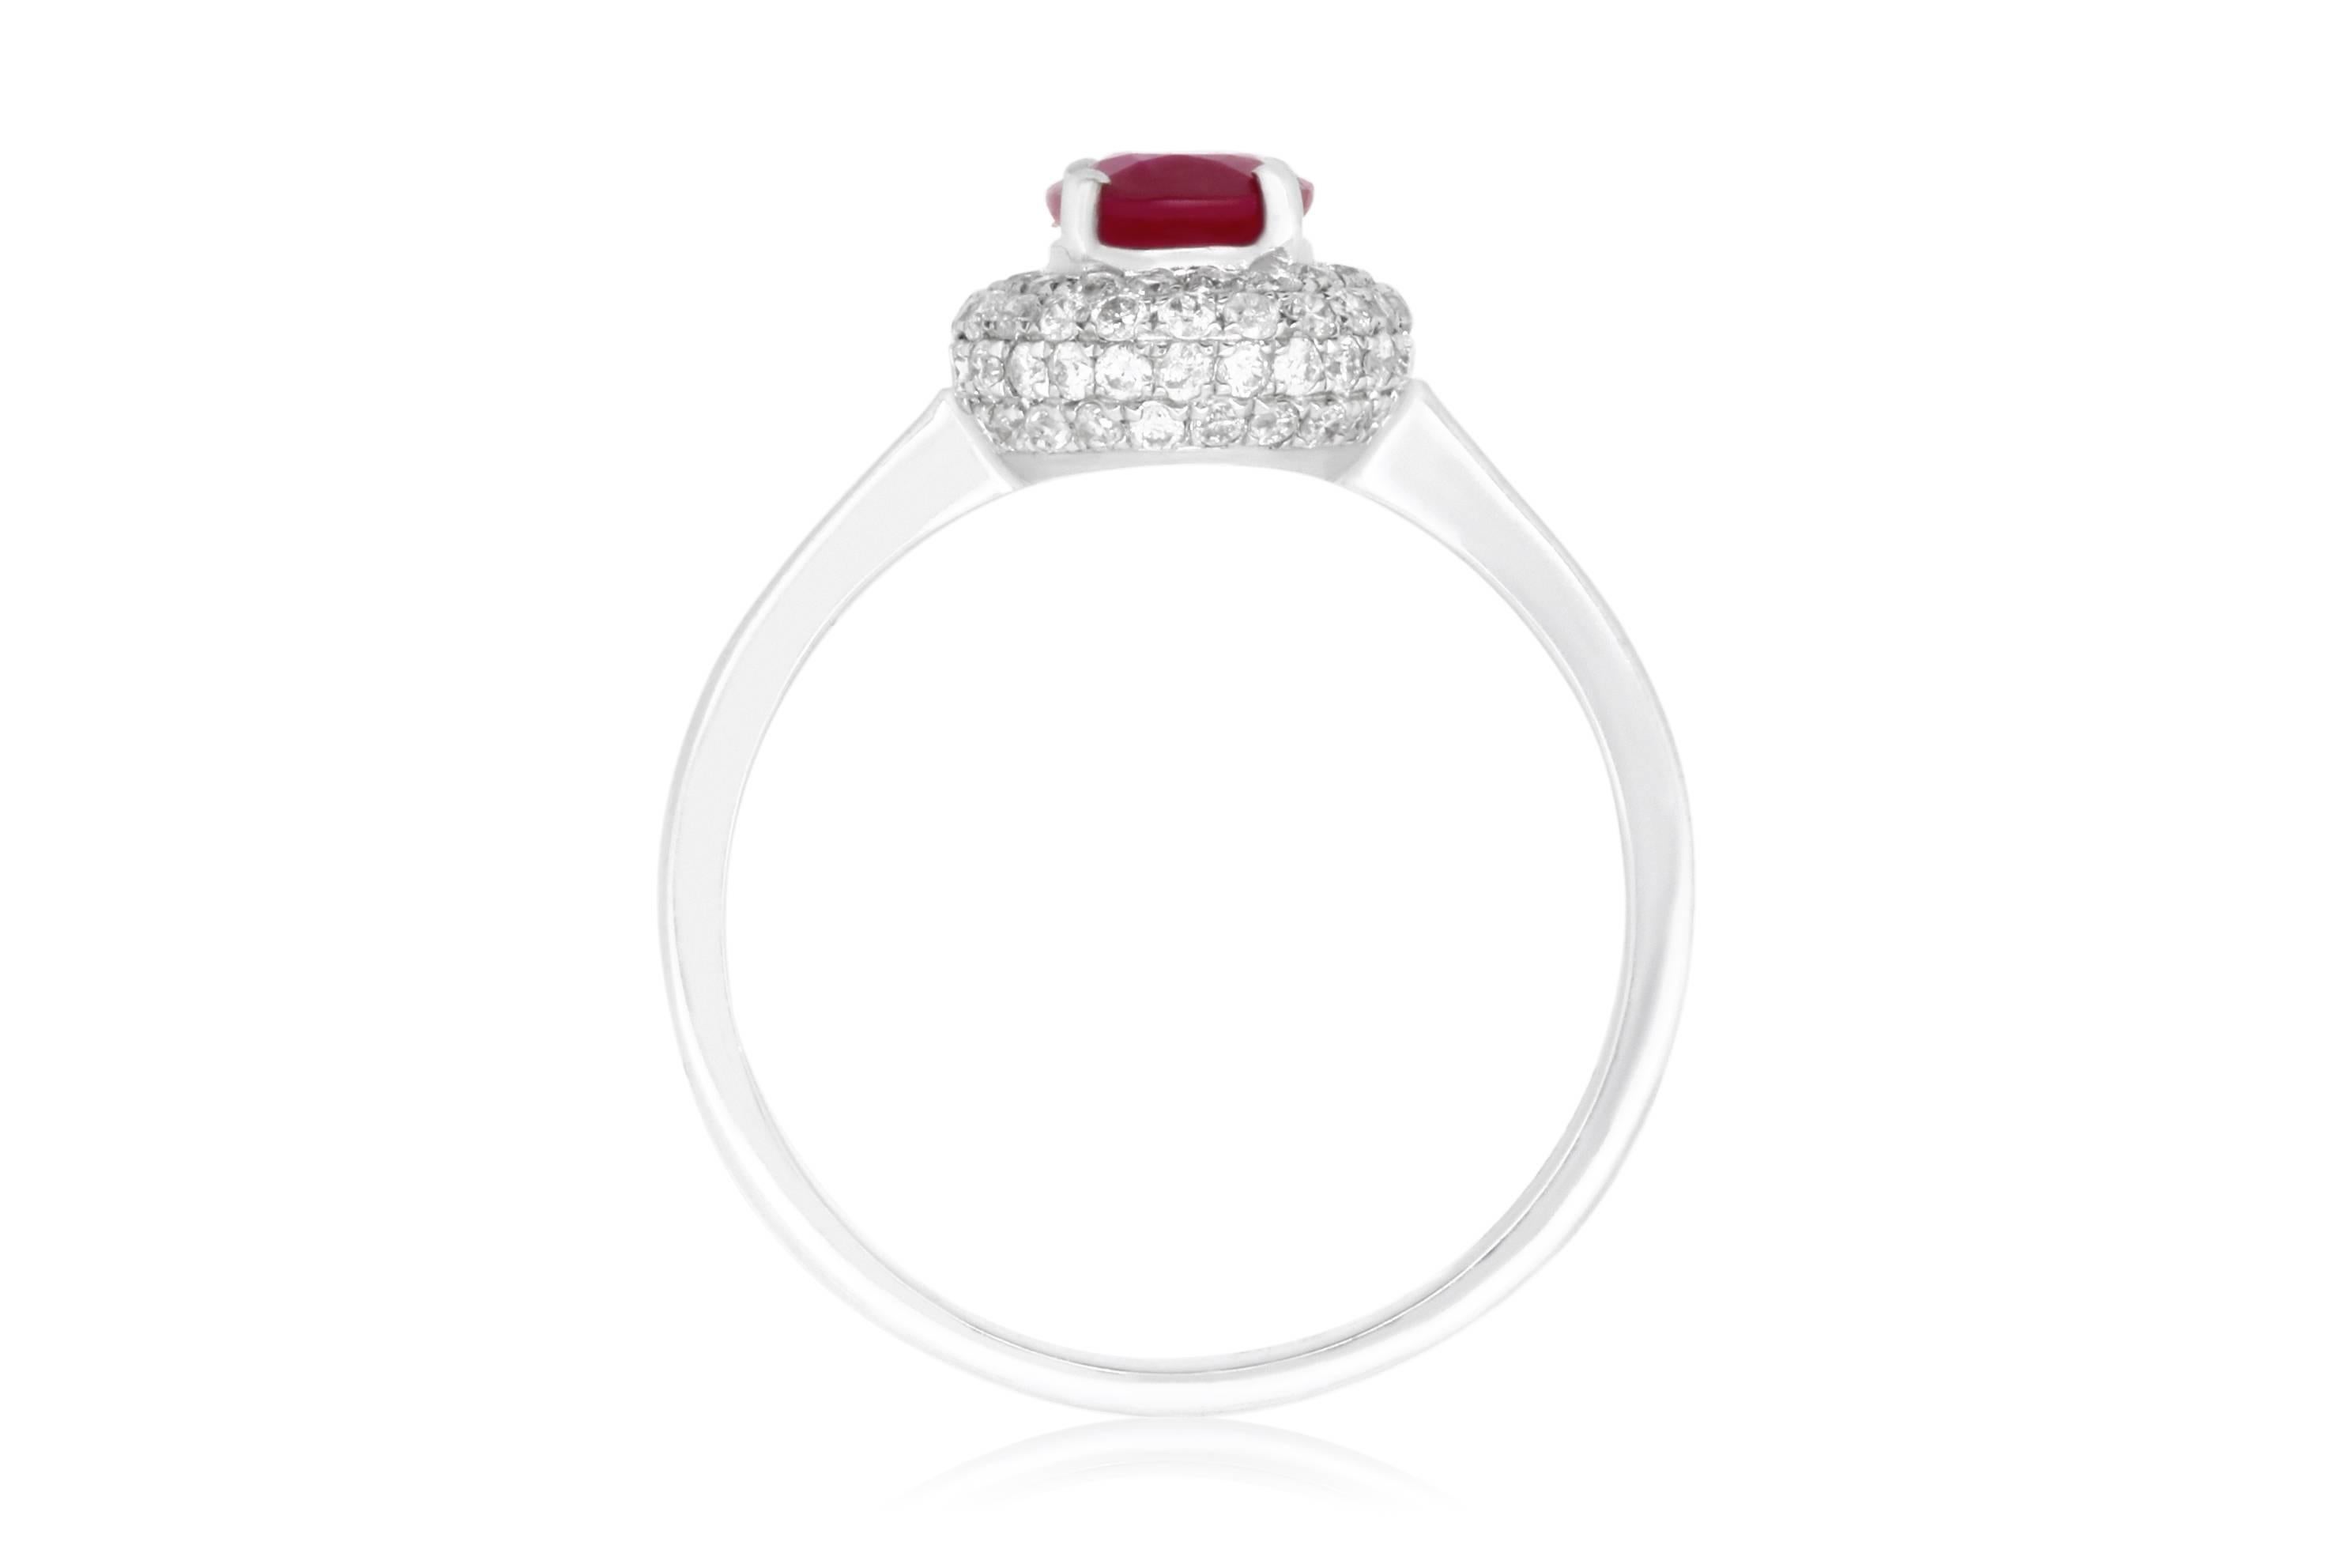 Material: 14k White Gold
Gemstones: 1 Oval Ruby at .78 Carats.
Diamonds: Brilliant Round White Diamonds at 0.90 Carats. SI Clarity / H-I Color. 
Ring Size: 6.5. Alberto offers complimentary sizing on all rings.

Fine one-of-a kind craftsmanship